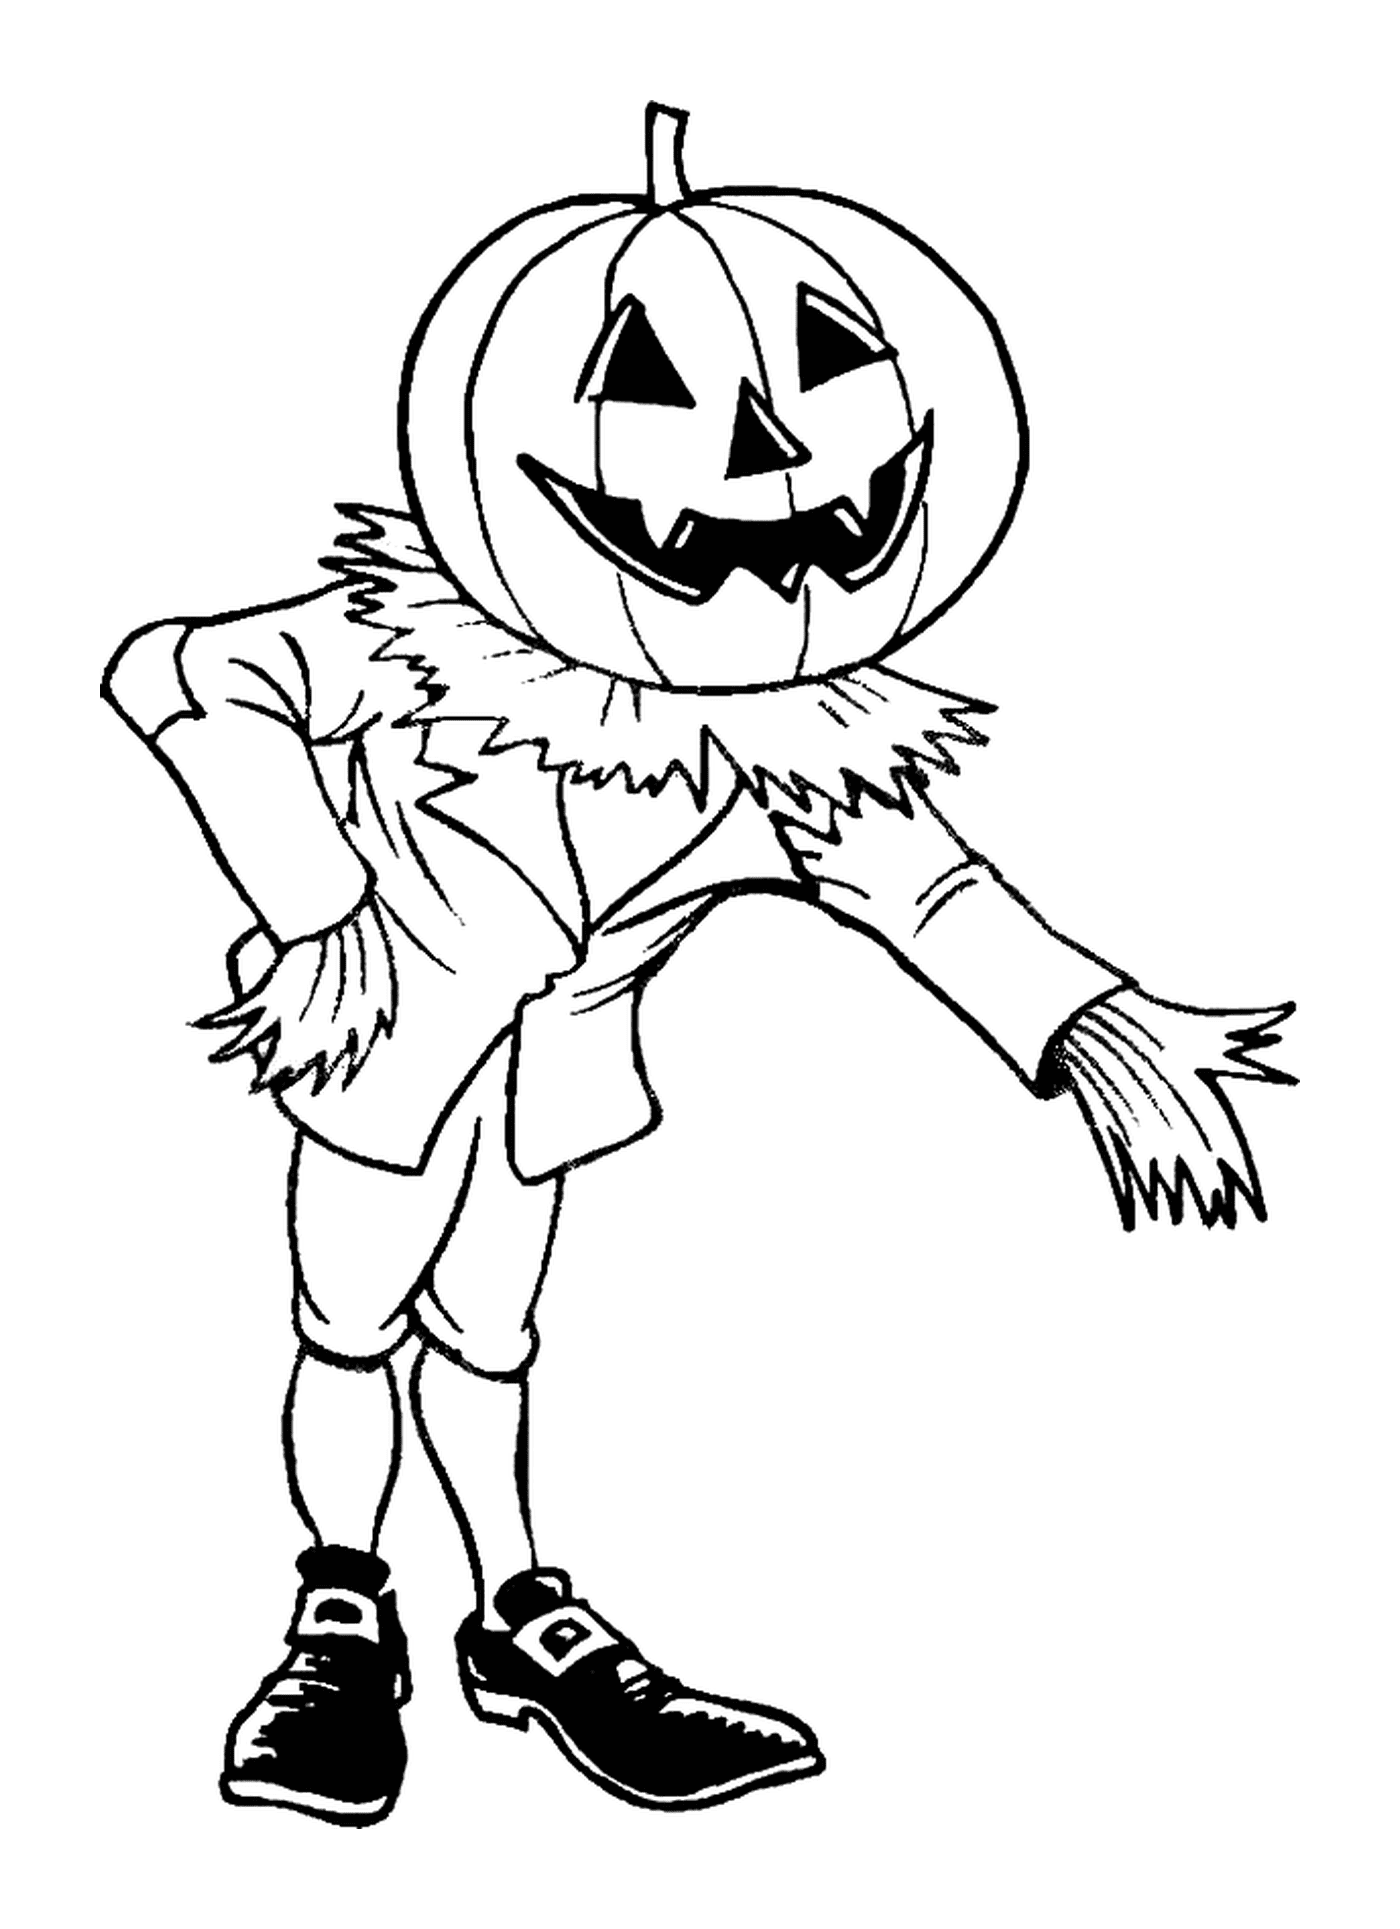  Scarecrow with pumpkin head 